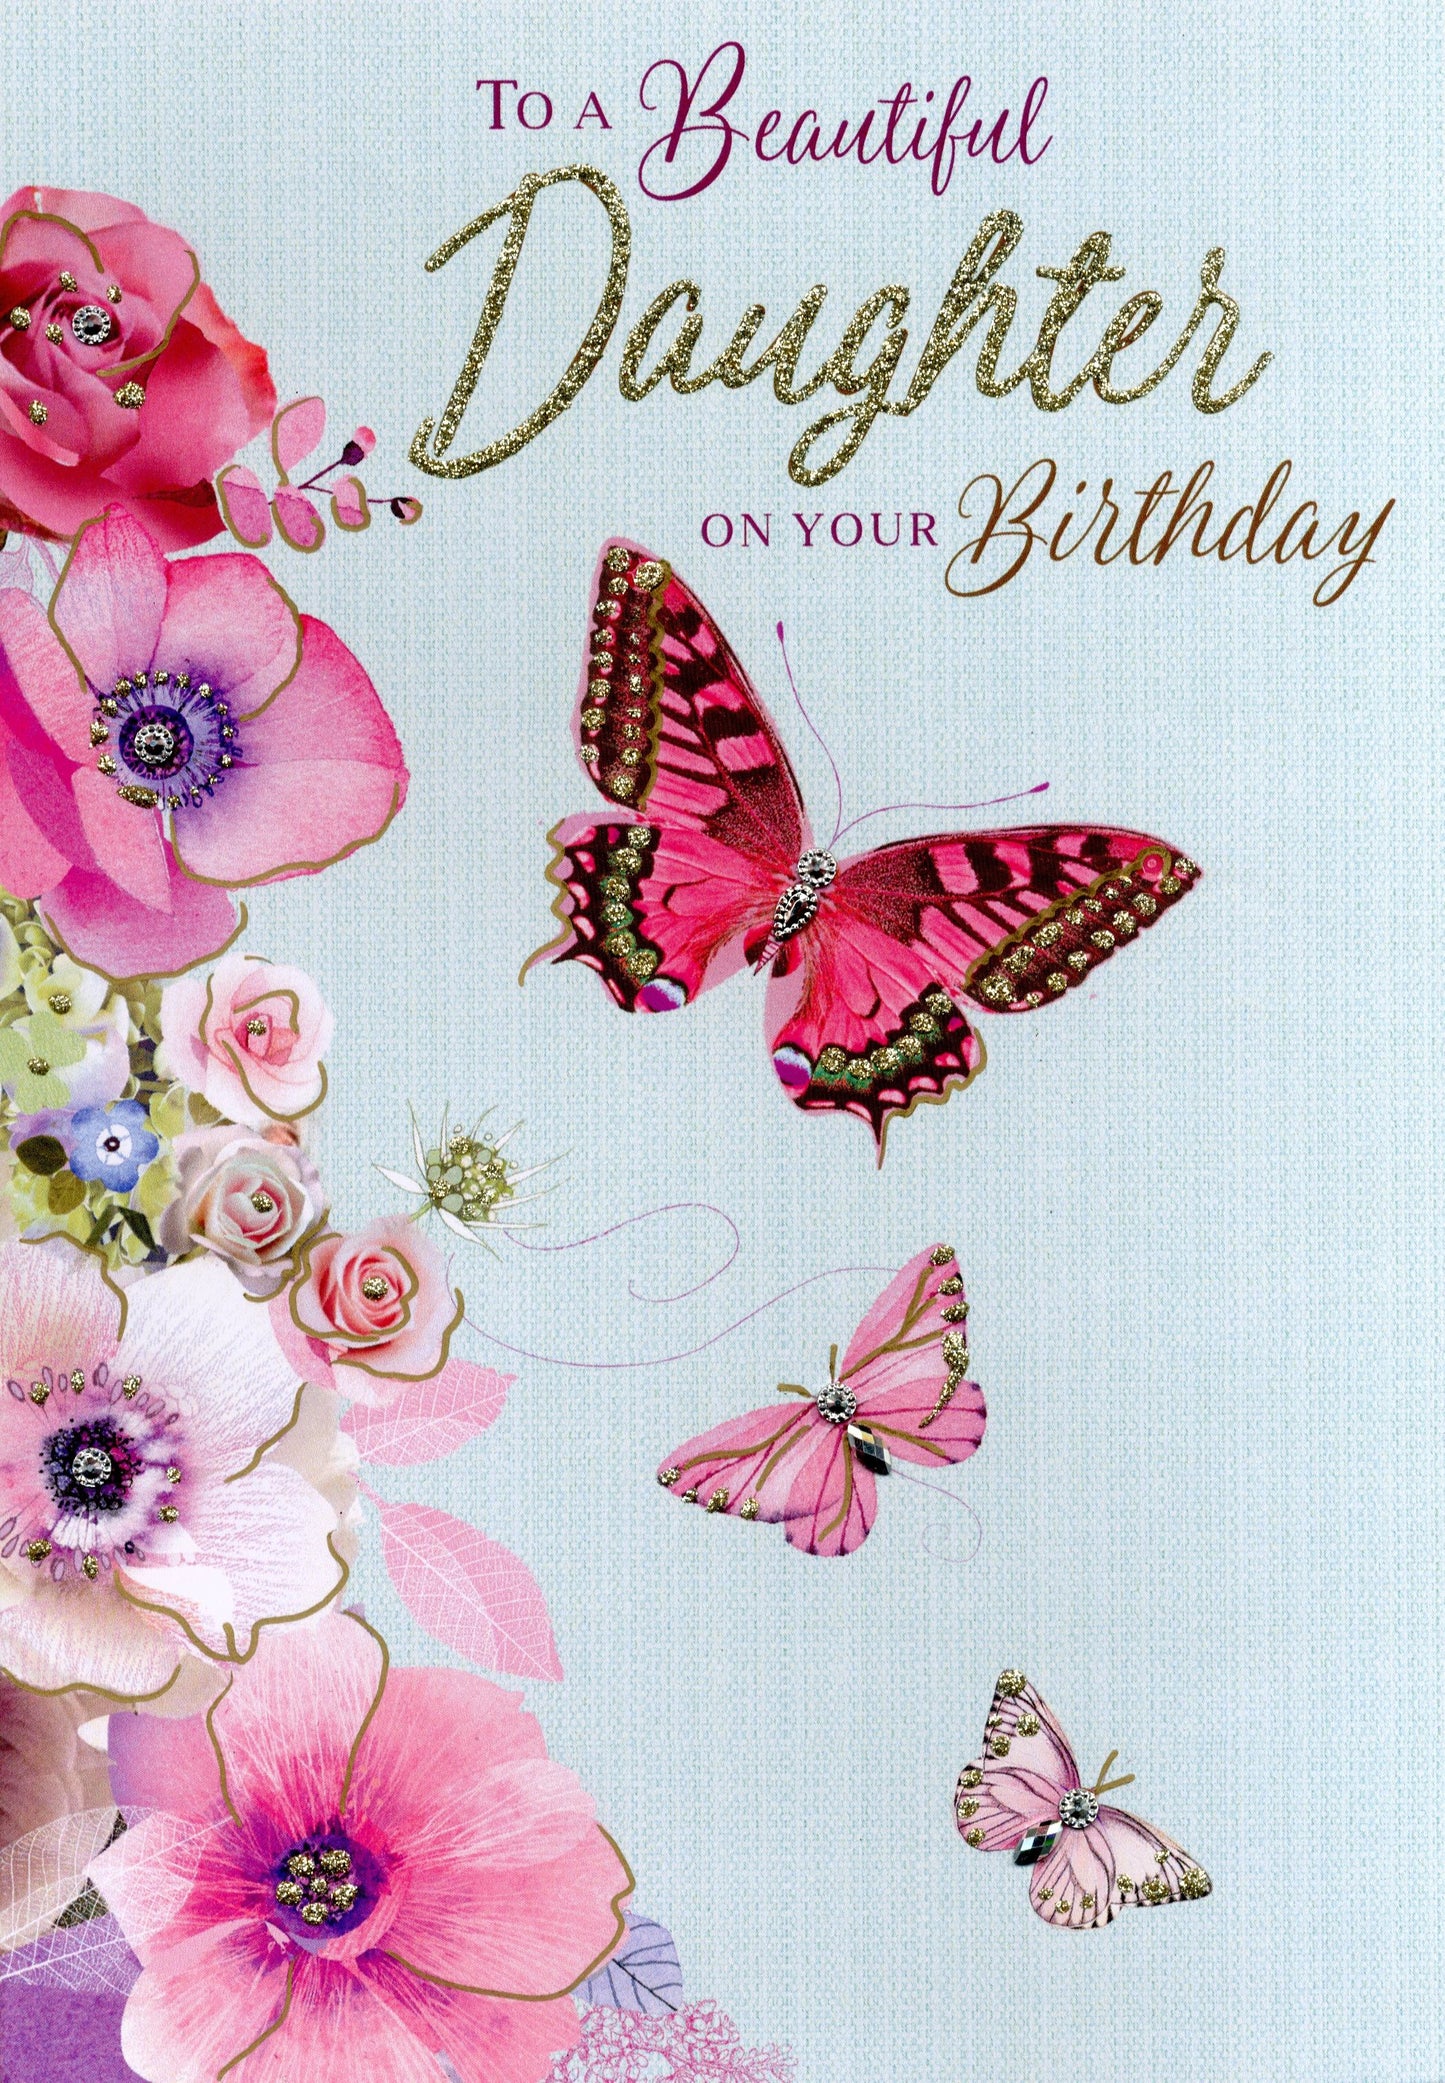 Magnifique Beautiful Daughter On Your Birthday Greeting Card